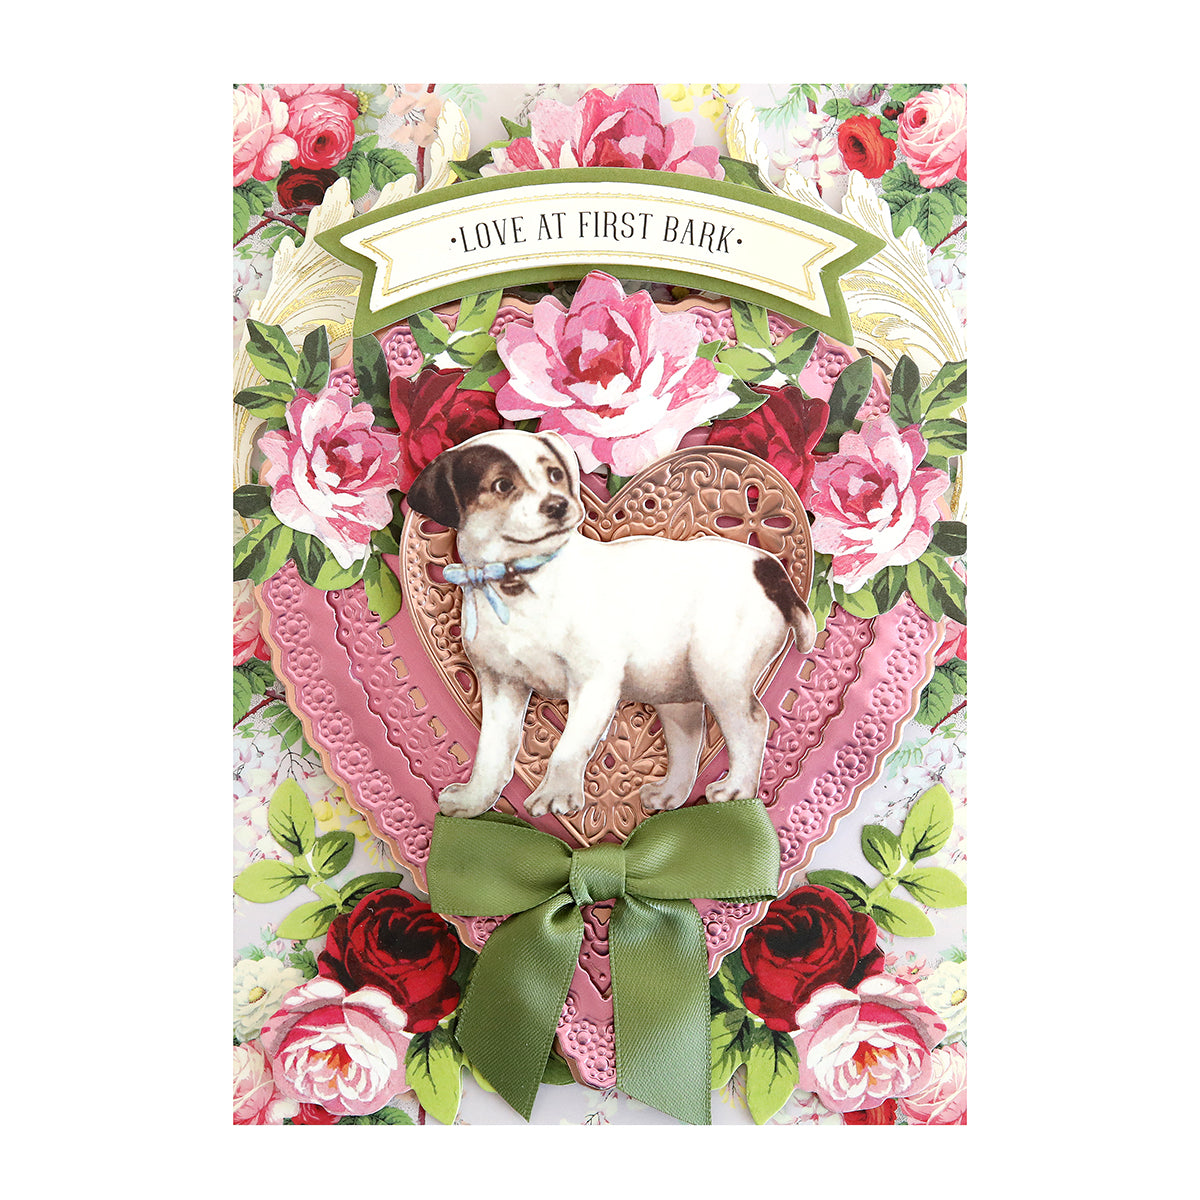 Decorative card with floral background featuring Fur Baby Dog Stickers and Sentiments including a dog illustration, dog embellishments, and the phrase "love at first bark.